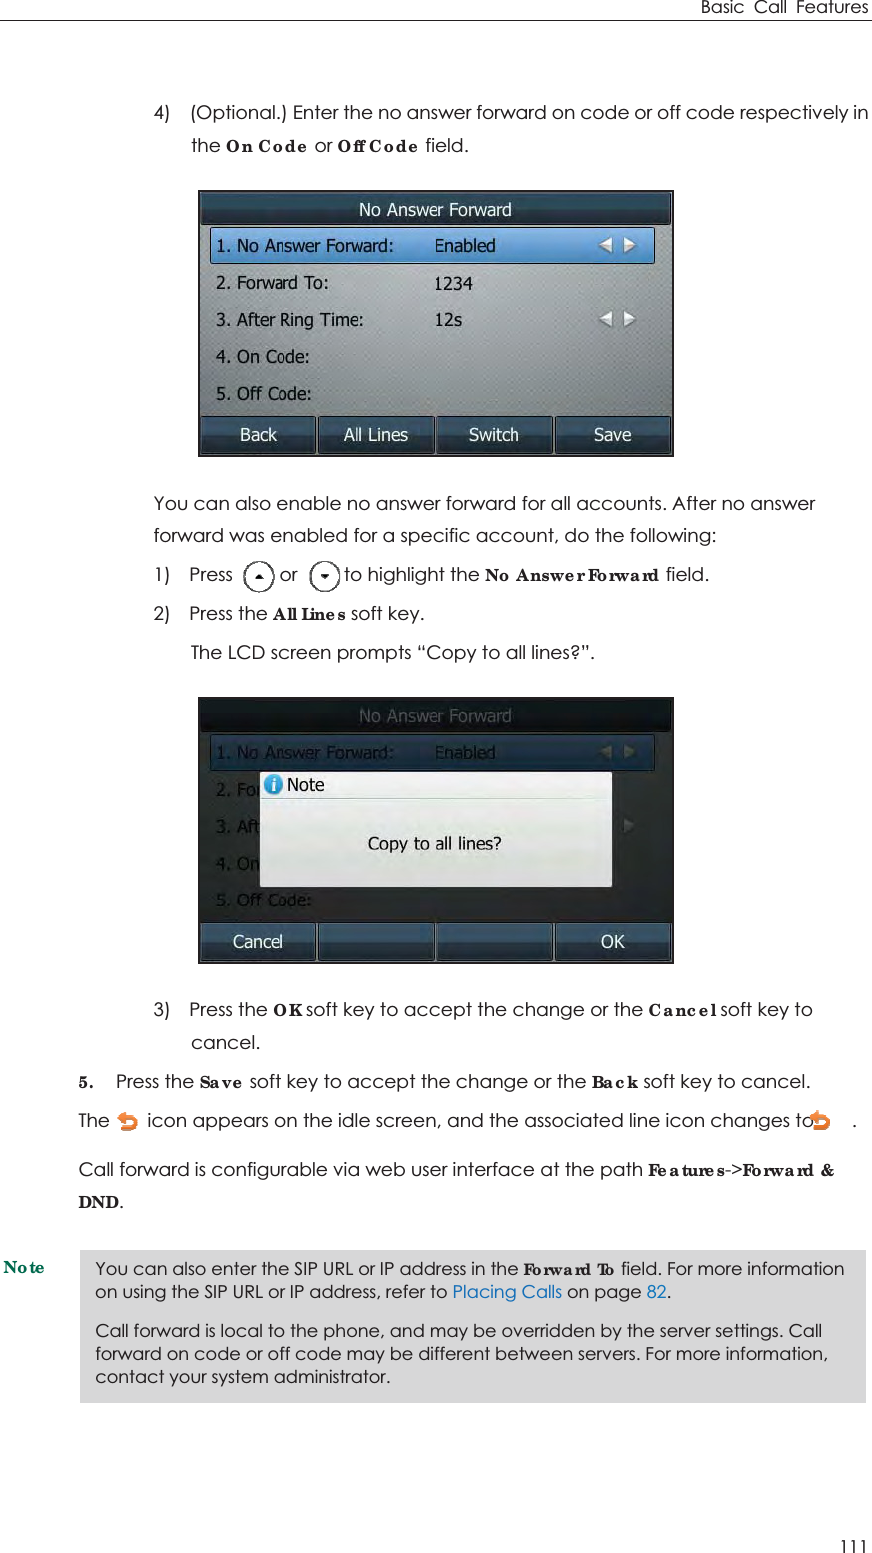 Basic Call Features 111  4)    (Optional.) Enter the no answer forward on code or off code respectively in the On Code or Off Code field.  You can also enable no answer forward for all accounts. After no answer forward was enabled for a specific account, do the following: 1)  Press     or     to highlight the No Answer Forward field. 2)  Press the All Lines soft key. The LCD screen prompts “Copy to all lines?”.  3)  Press the OK soft key to accept the change or the Cancel soft key to cancel. 5. Press the Save soft key to accept the change or the Back soft key to cancel. The        icon appears on the idle screen, and the associated line icon changes to        . Call forward is configurable via web user interface at the path Features-&gt;Forward &amp; DND. Note You can also enter the SIP URL or IP address in the Forward To field. For more information on using the SIP URL or IP address, refer to Placing Calls on page 82. Call forward is local to the phone, and may be overridden by the server settings. Call forward on code or off code may be different between servers. For more information, contact your system administrator. 